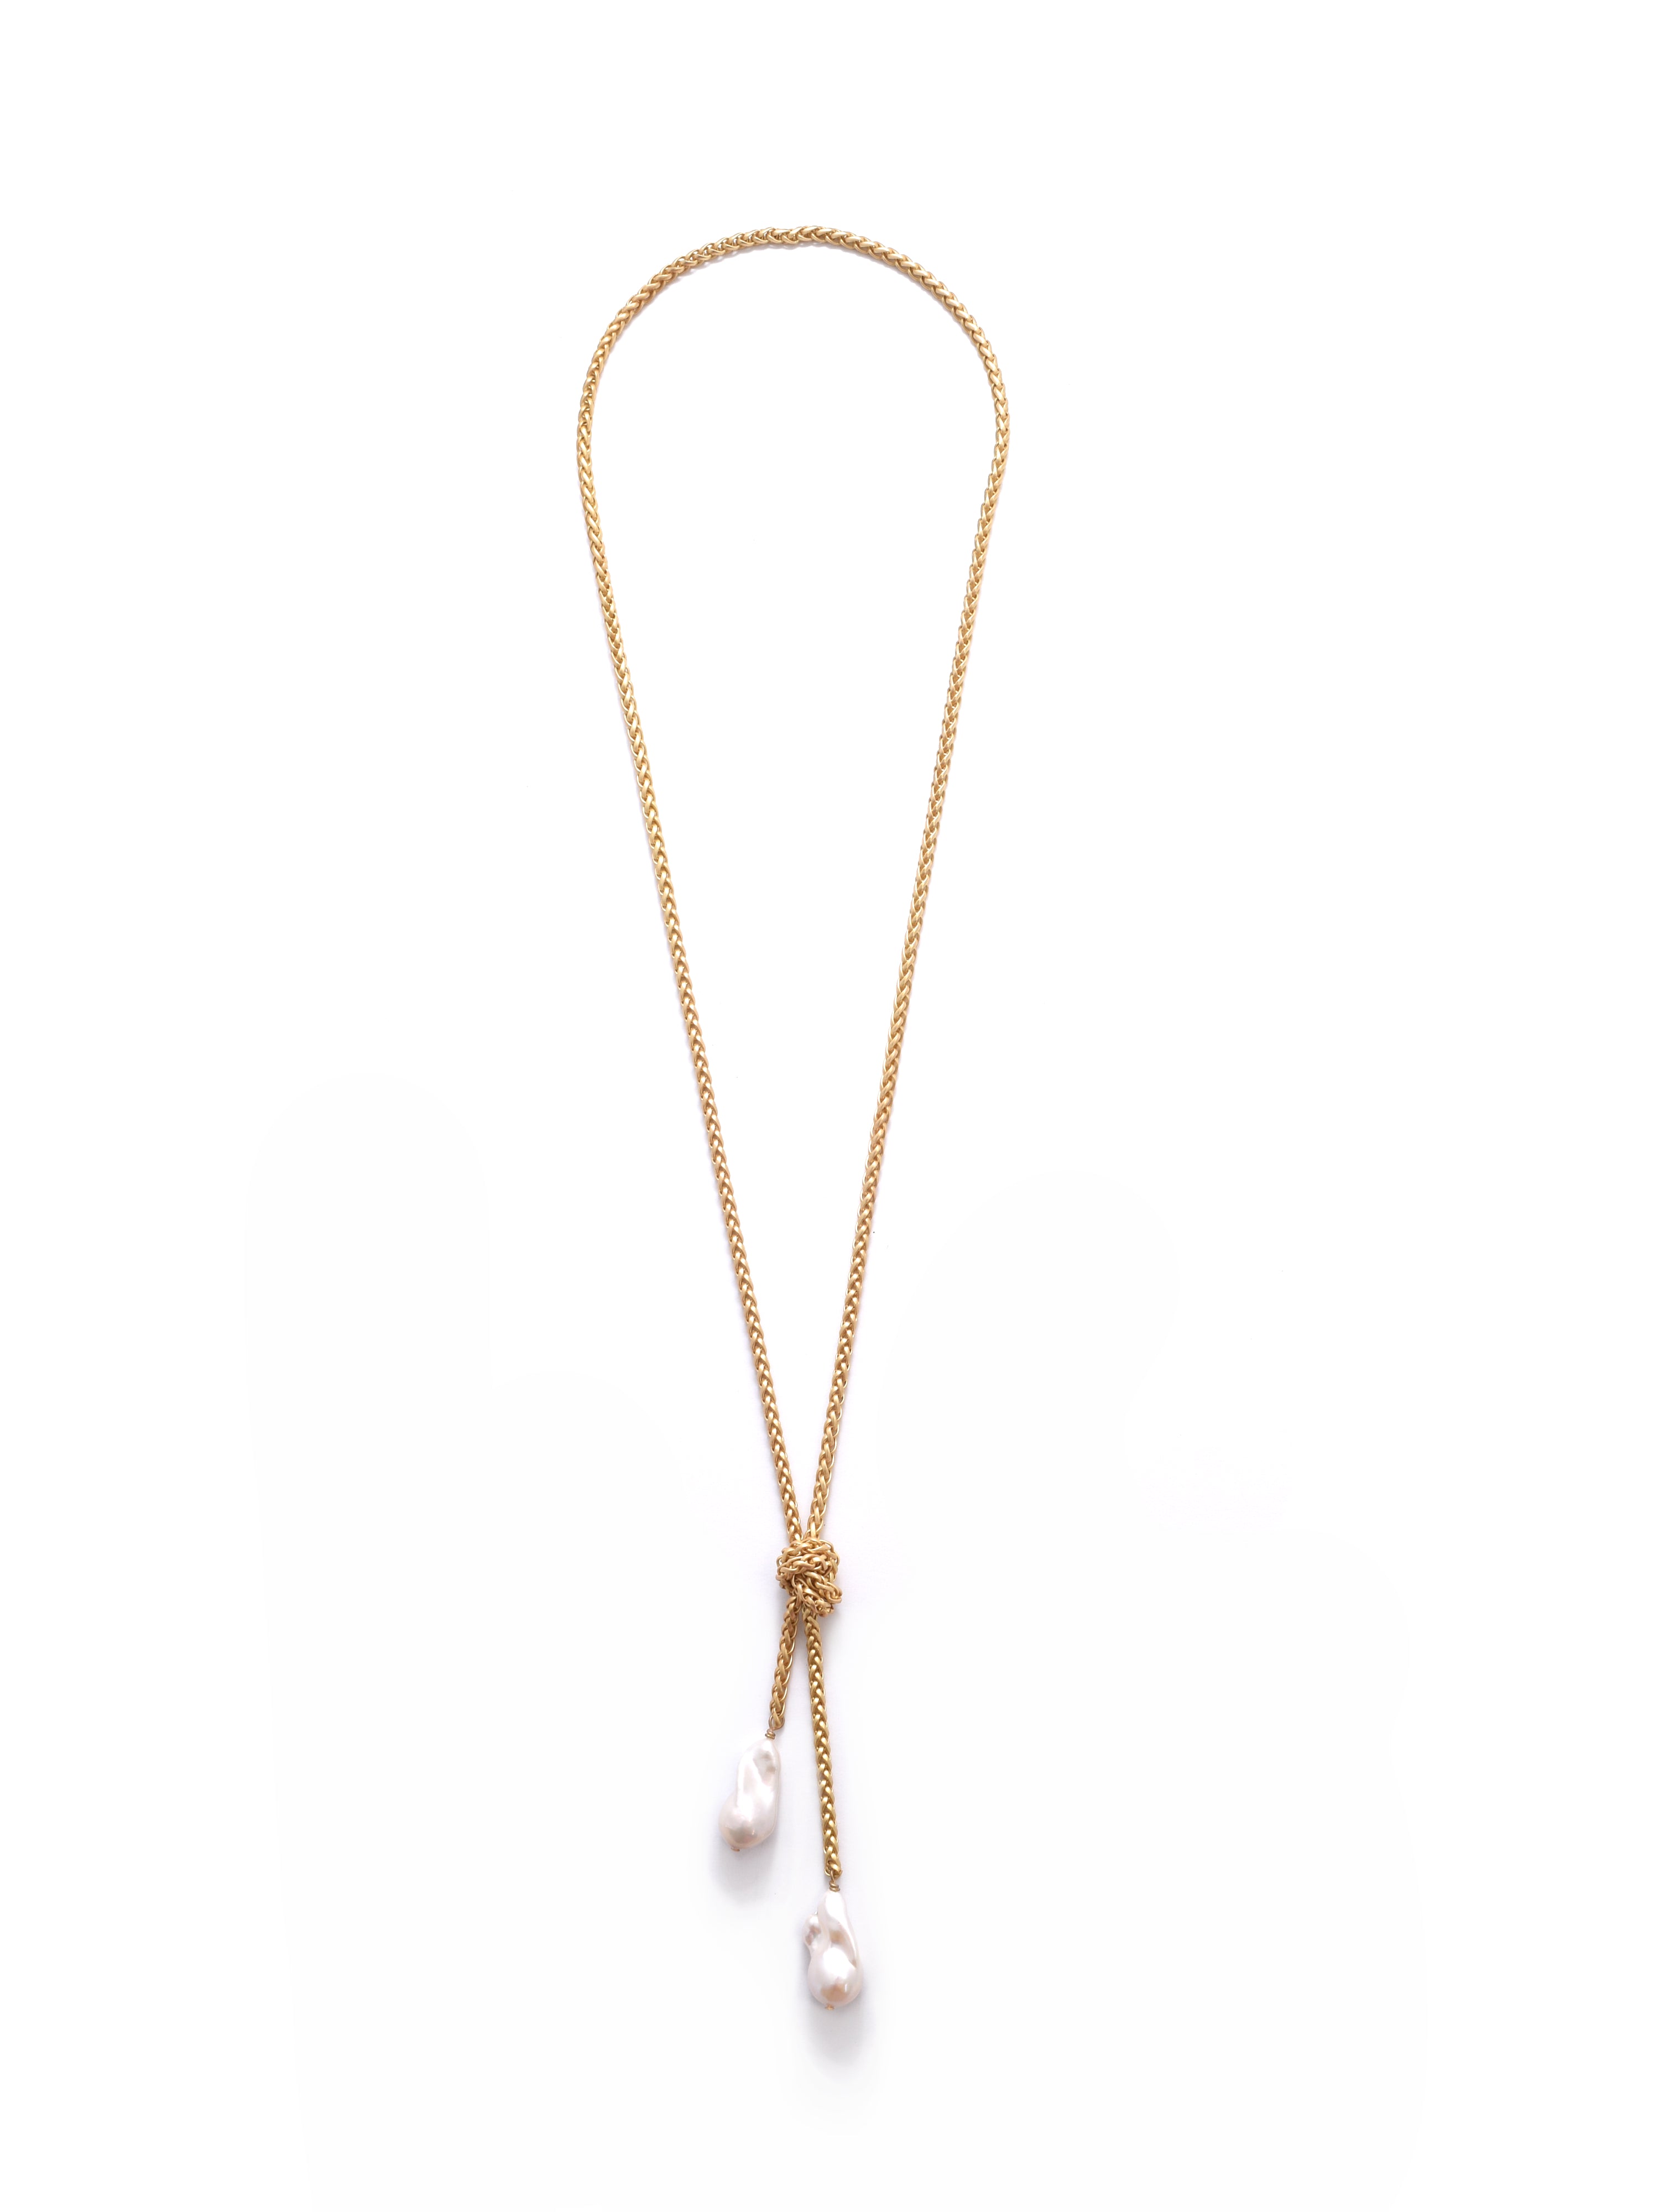 Necklaces | Hermosa Jewelry - Made in Charleston, SC